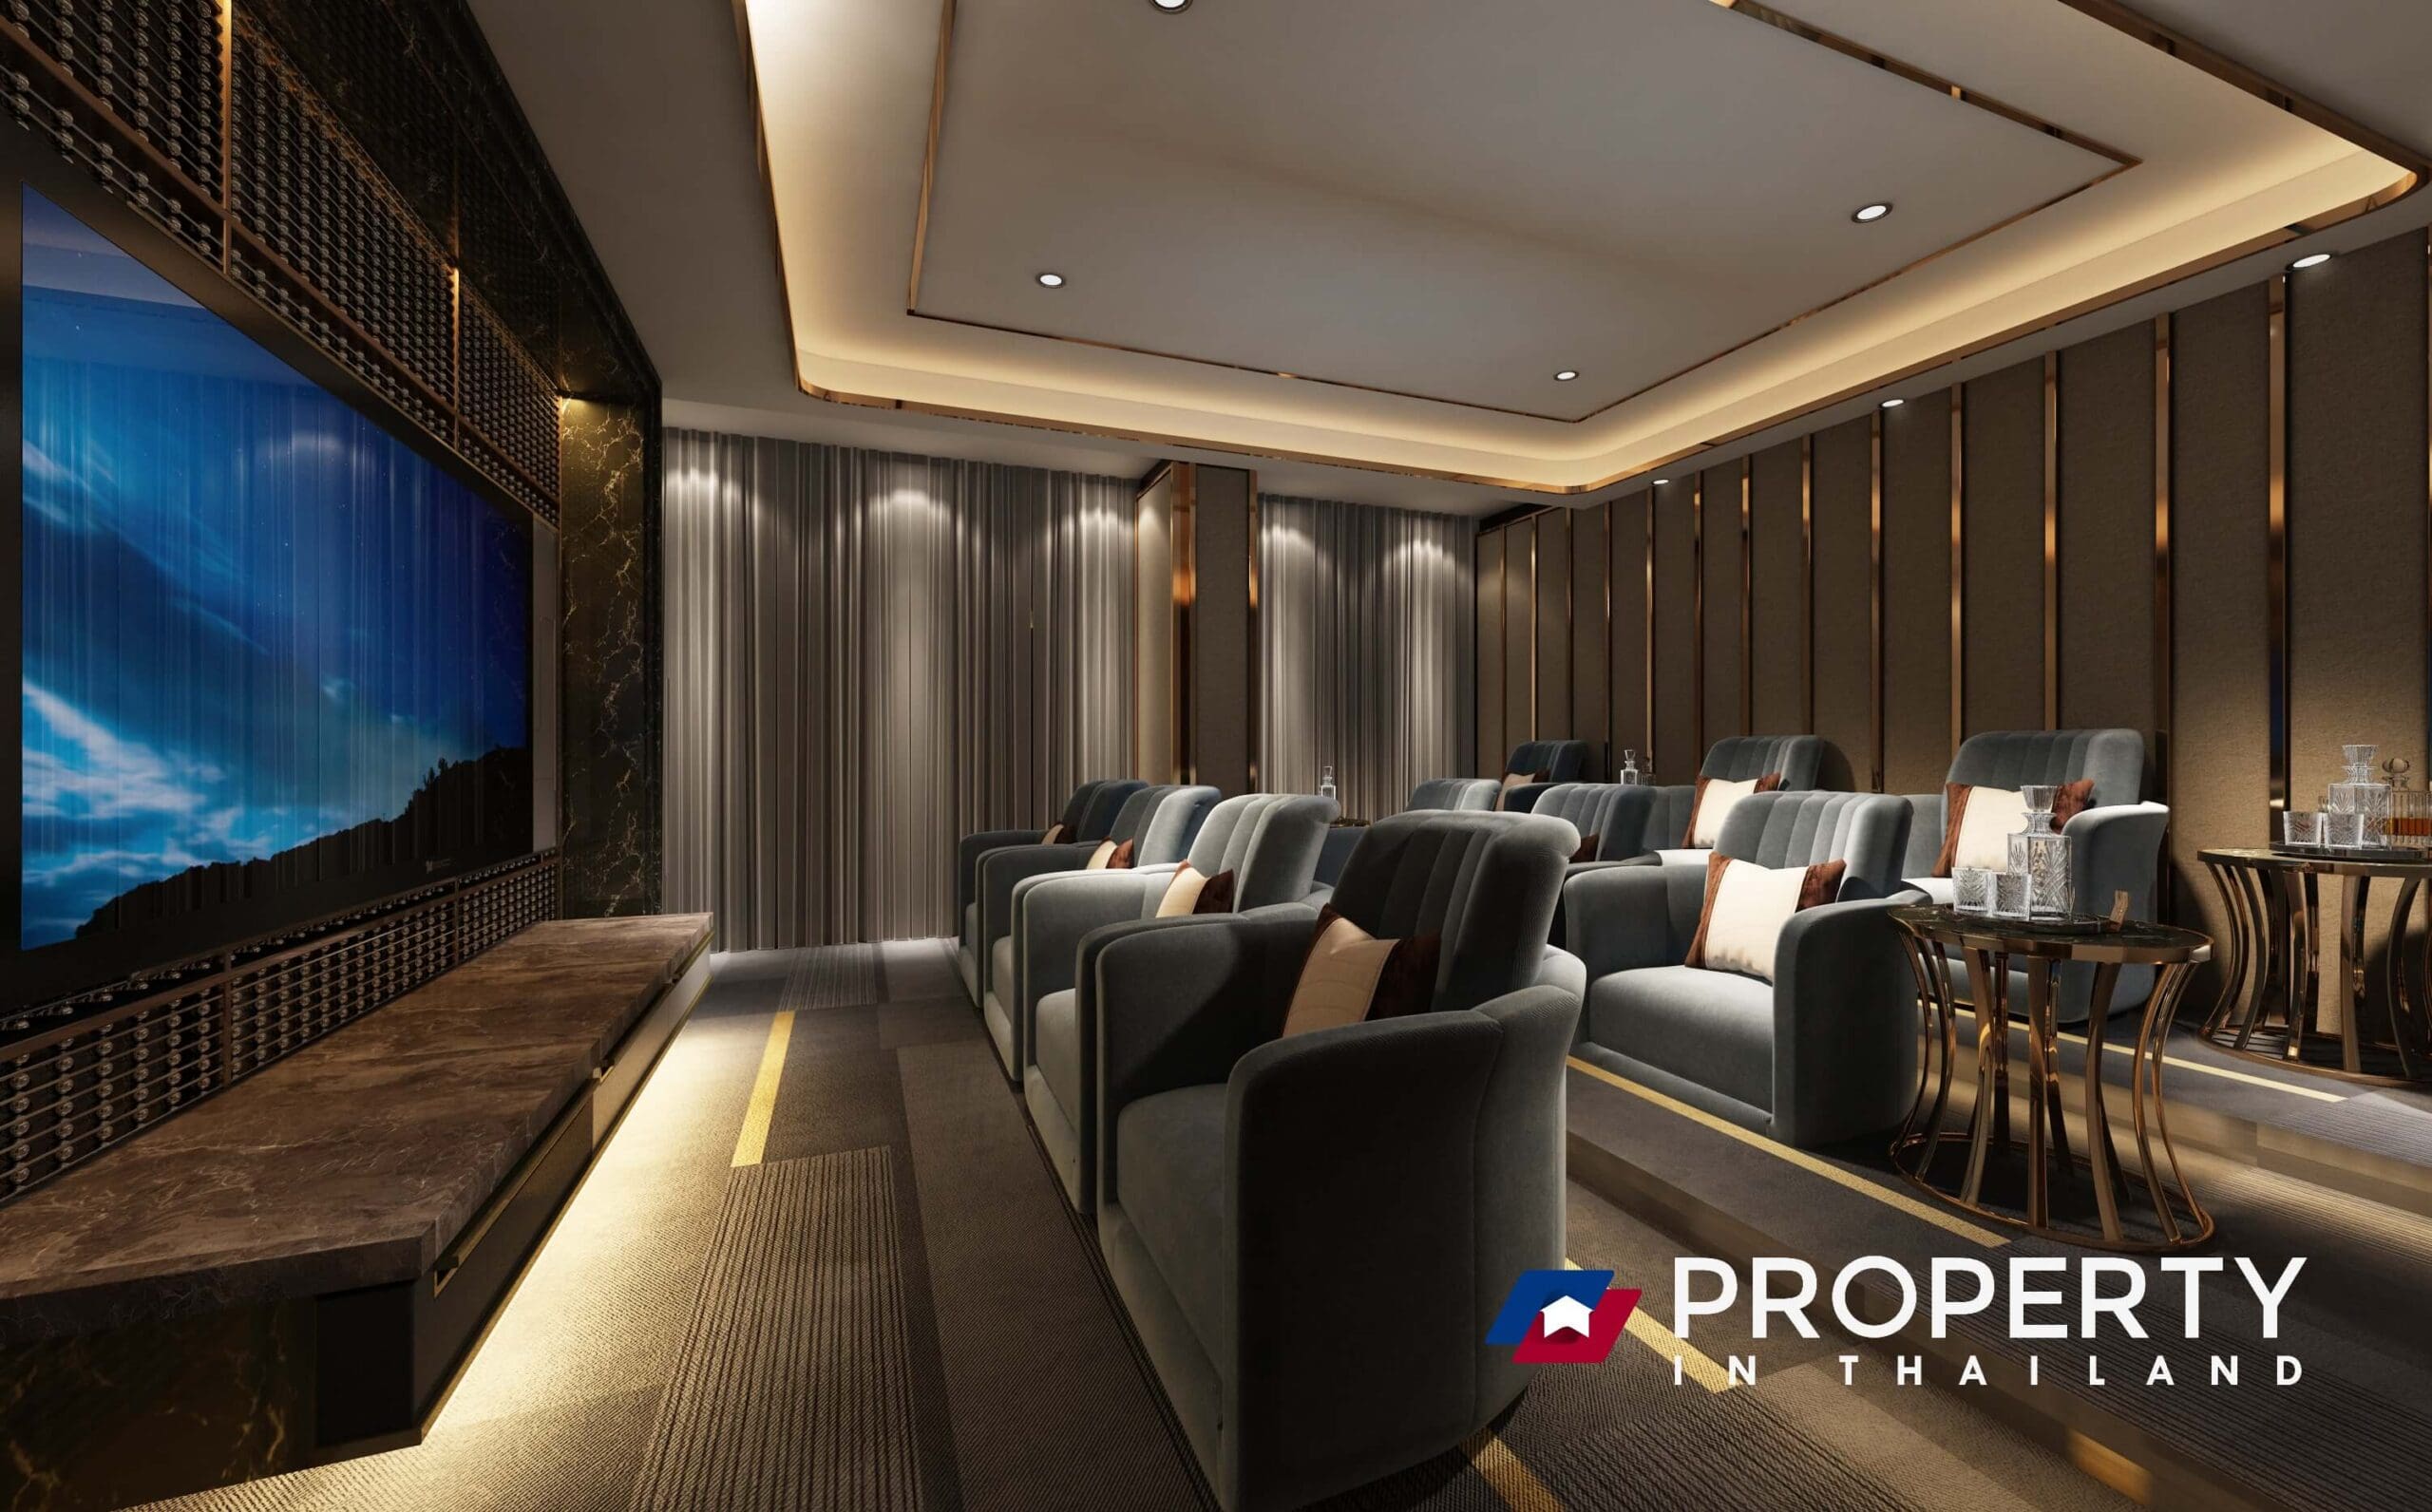 Thailand Property (Home Theatre)